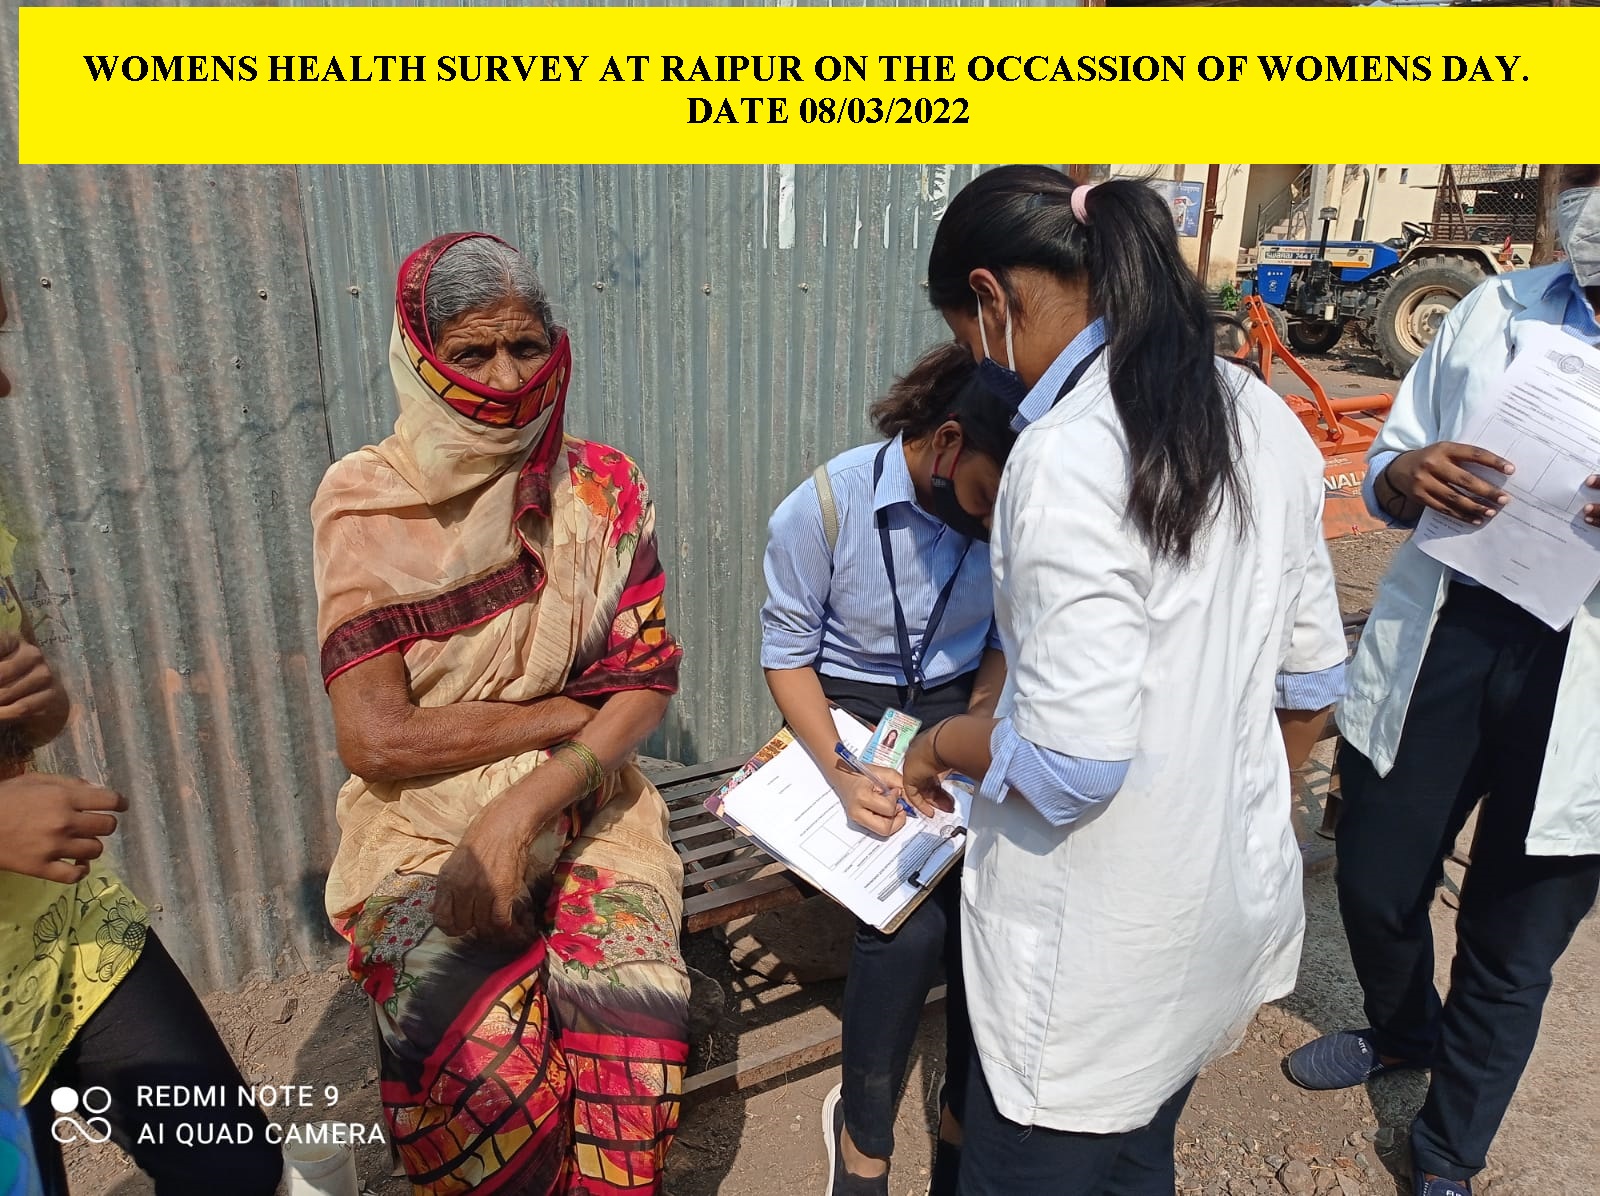 WOMENS HEALTH SURVEY AT RAIPUR ON THE OCCASSION OF  WOMENS DAY 08/03/2022